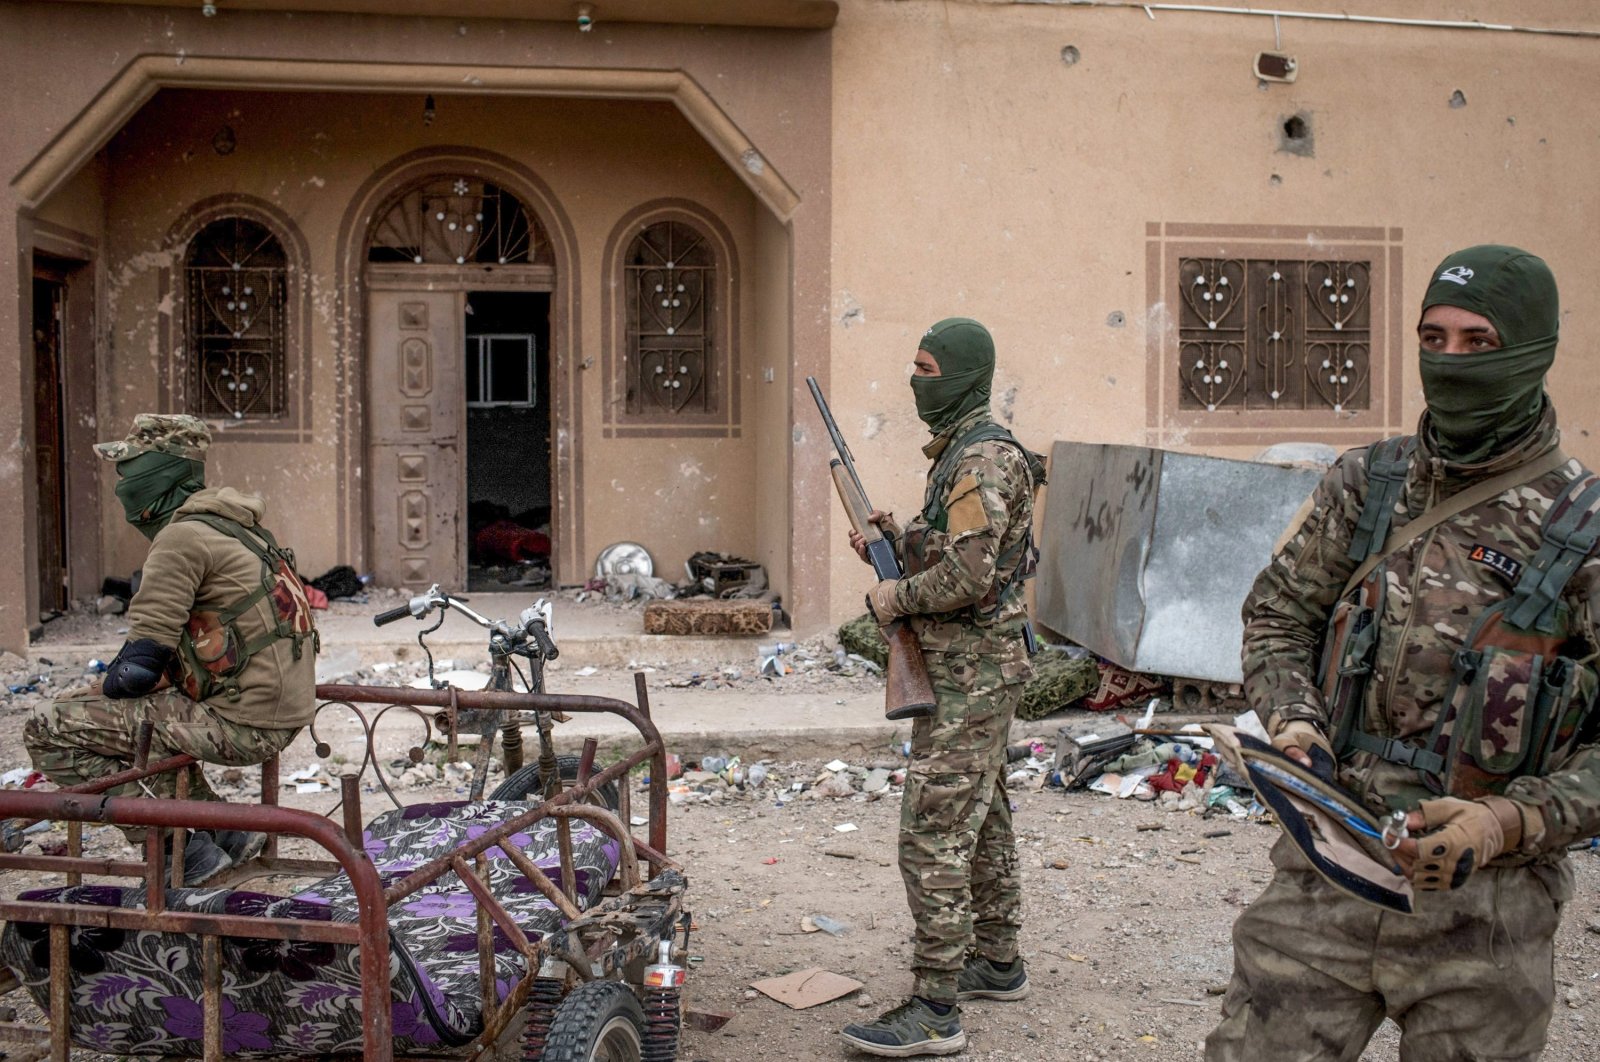 YPG/PKK terrorists are seen in front of a building in Baghouz, Syria, on March 24, 2019. (Photo by Chris McGrath/Getty Images)